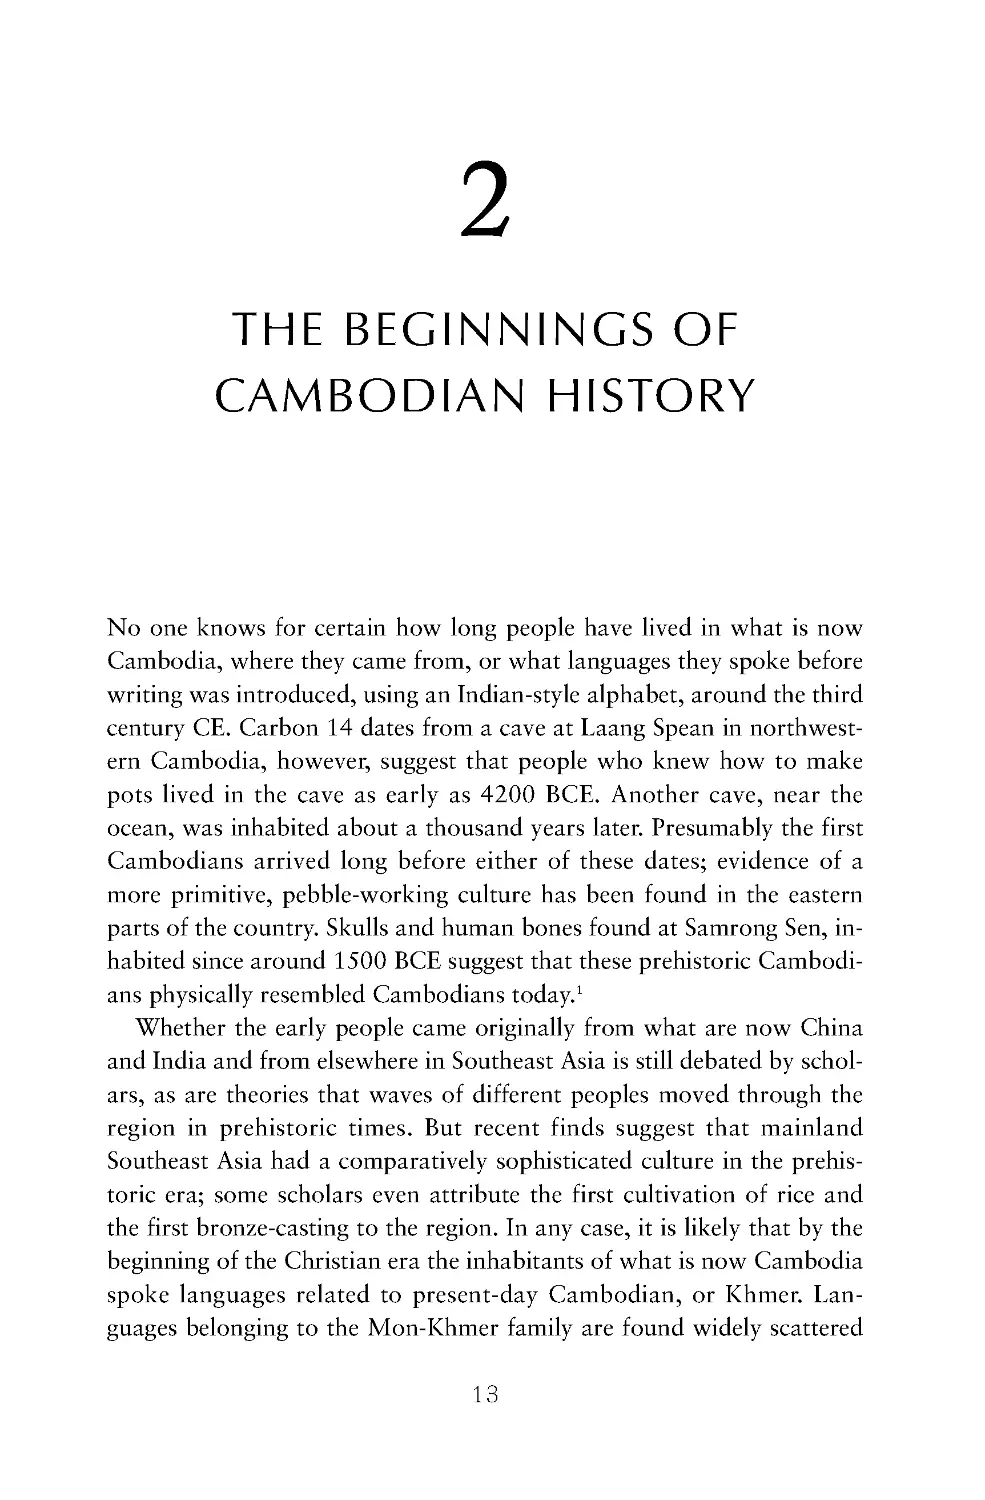 2. The Beginnings of Cambodian History